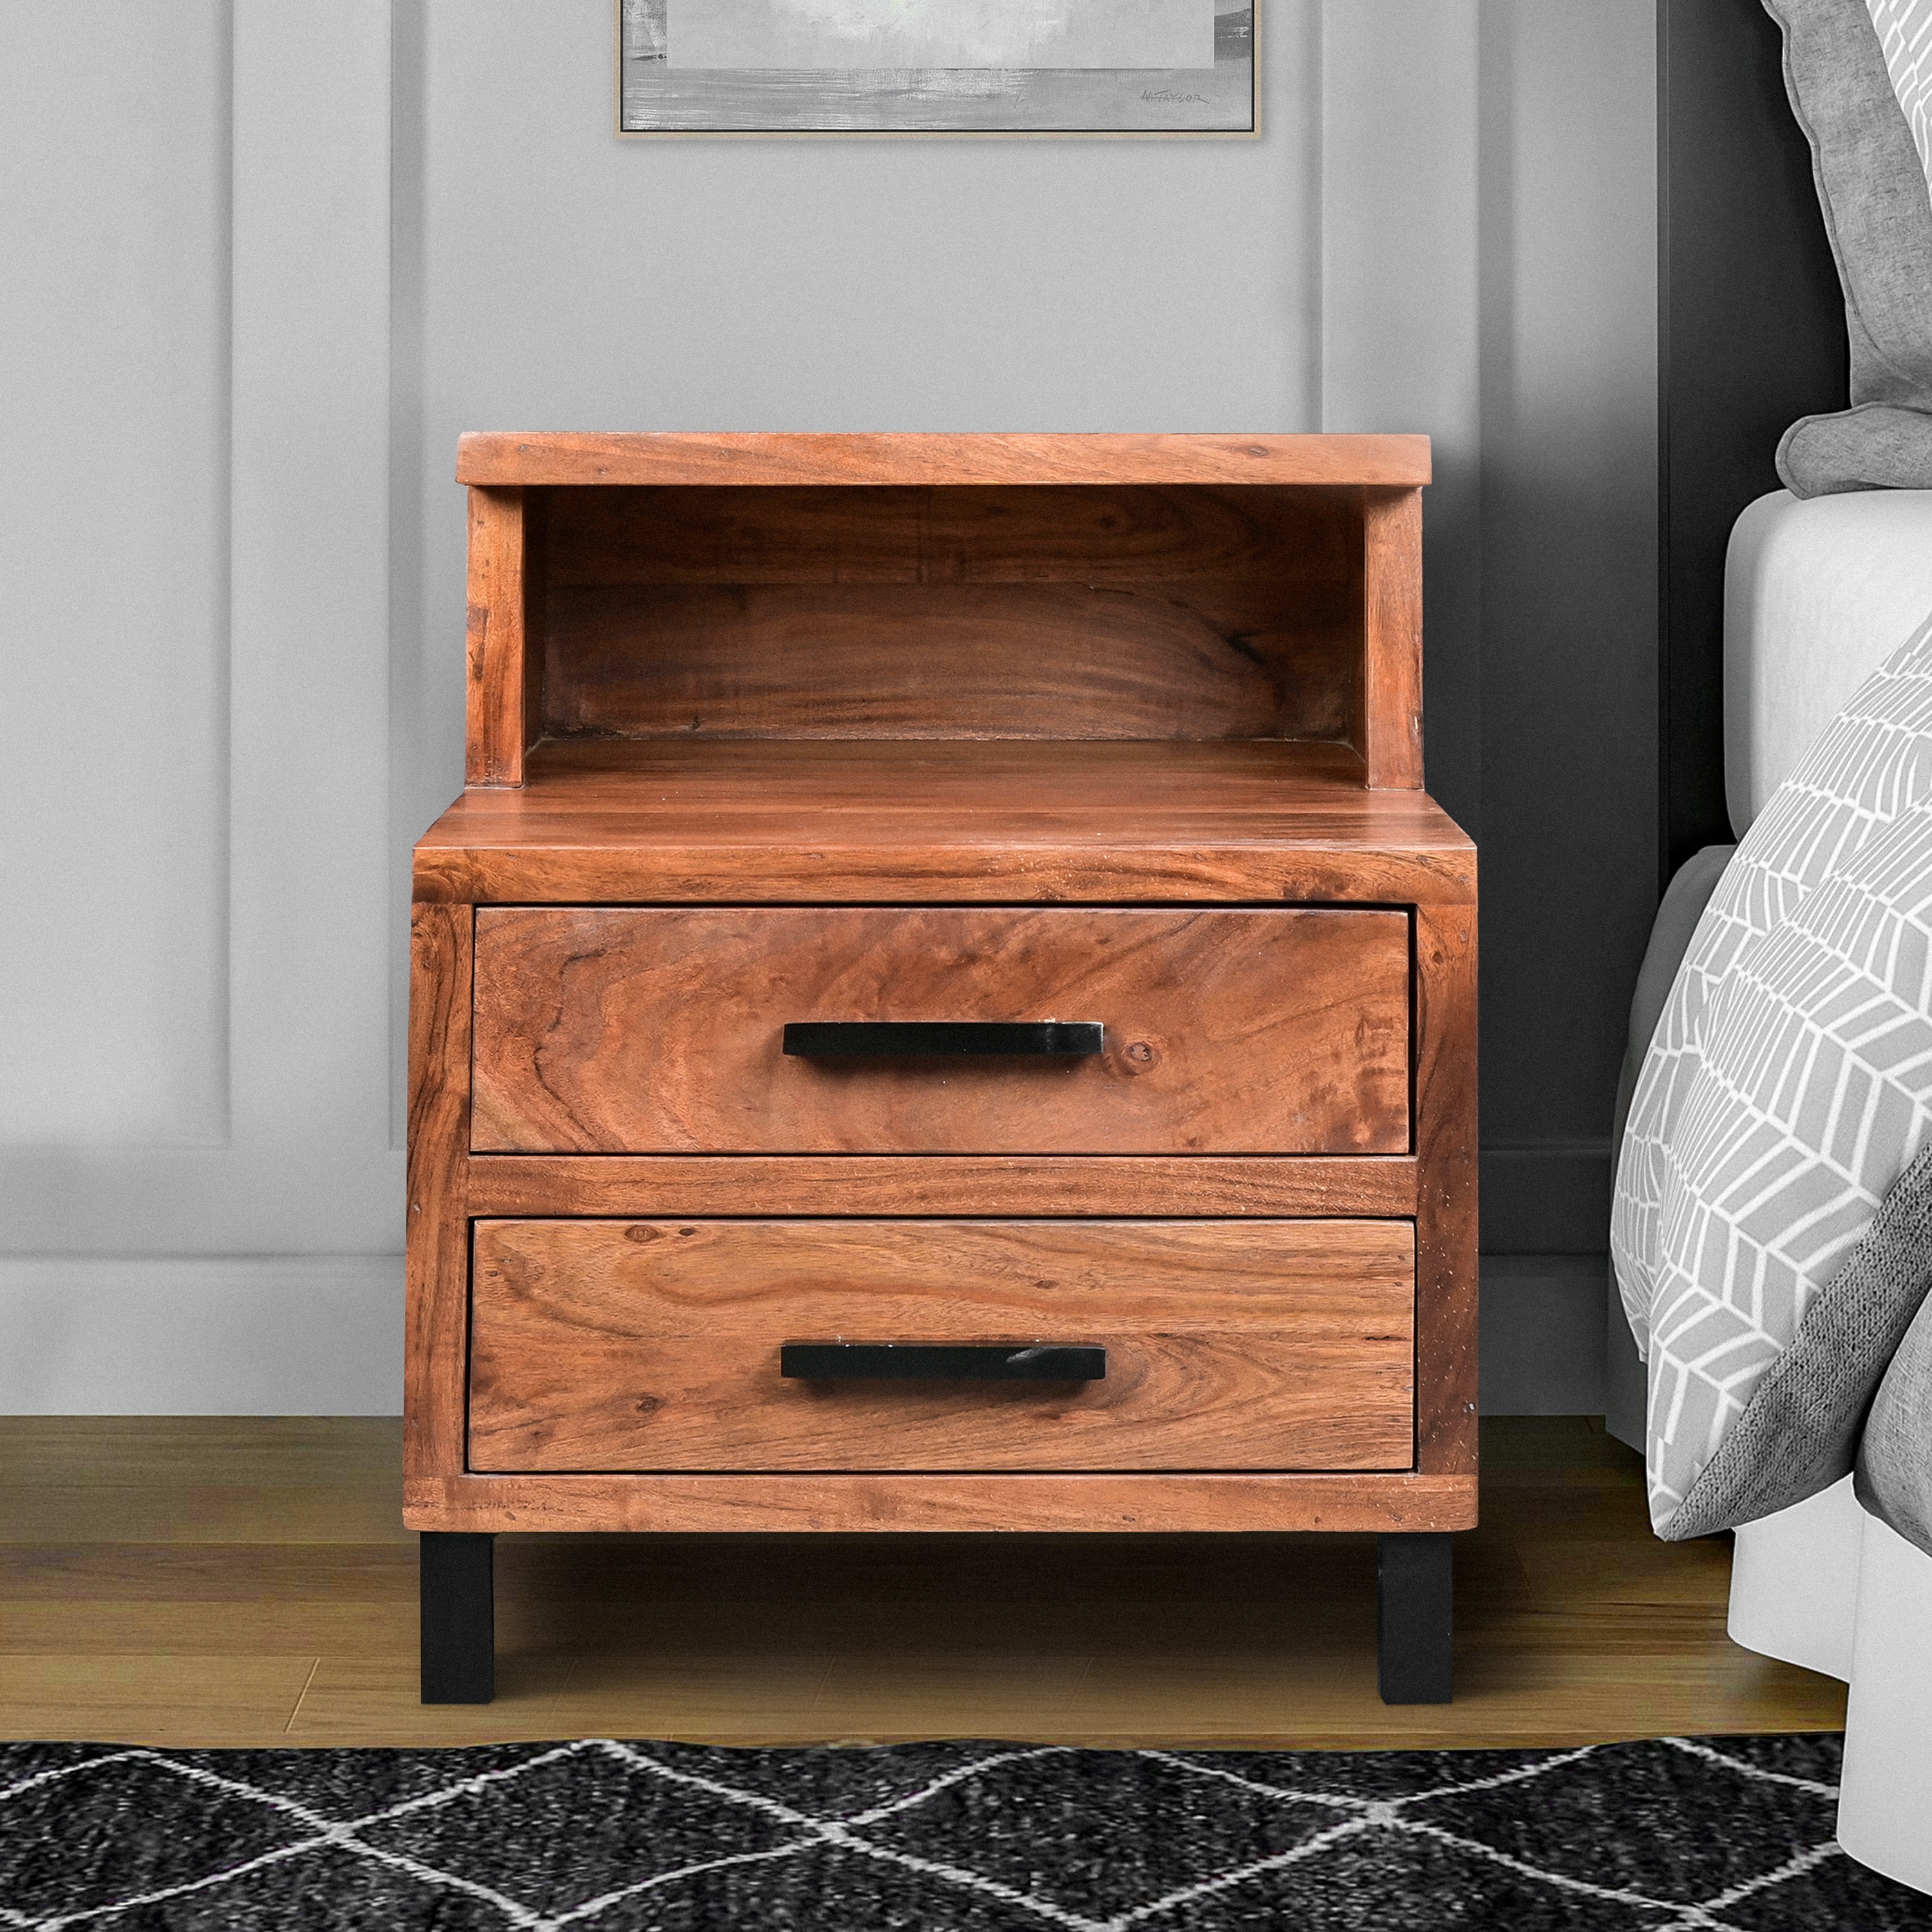 22 Inch Acacia Wood Nightstand, Bedside Table with 2 Drawers and Open Cubby, Walnut Brown - image 1 of 5